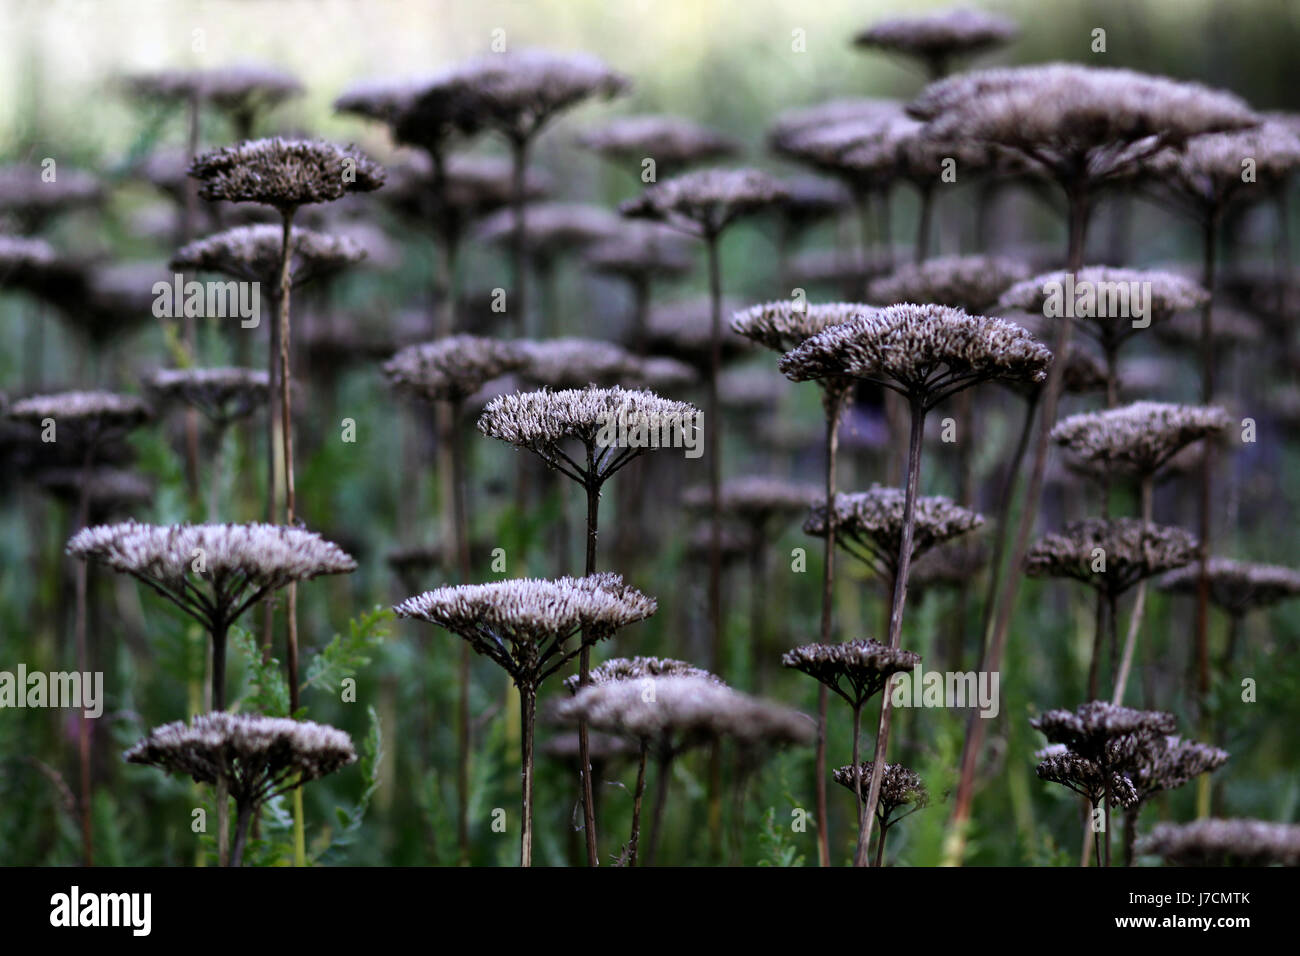 flowerpower - the army of gold sheaves Stock Photo